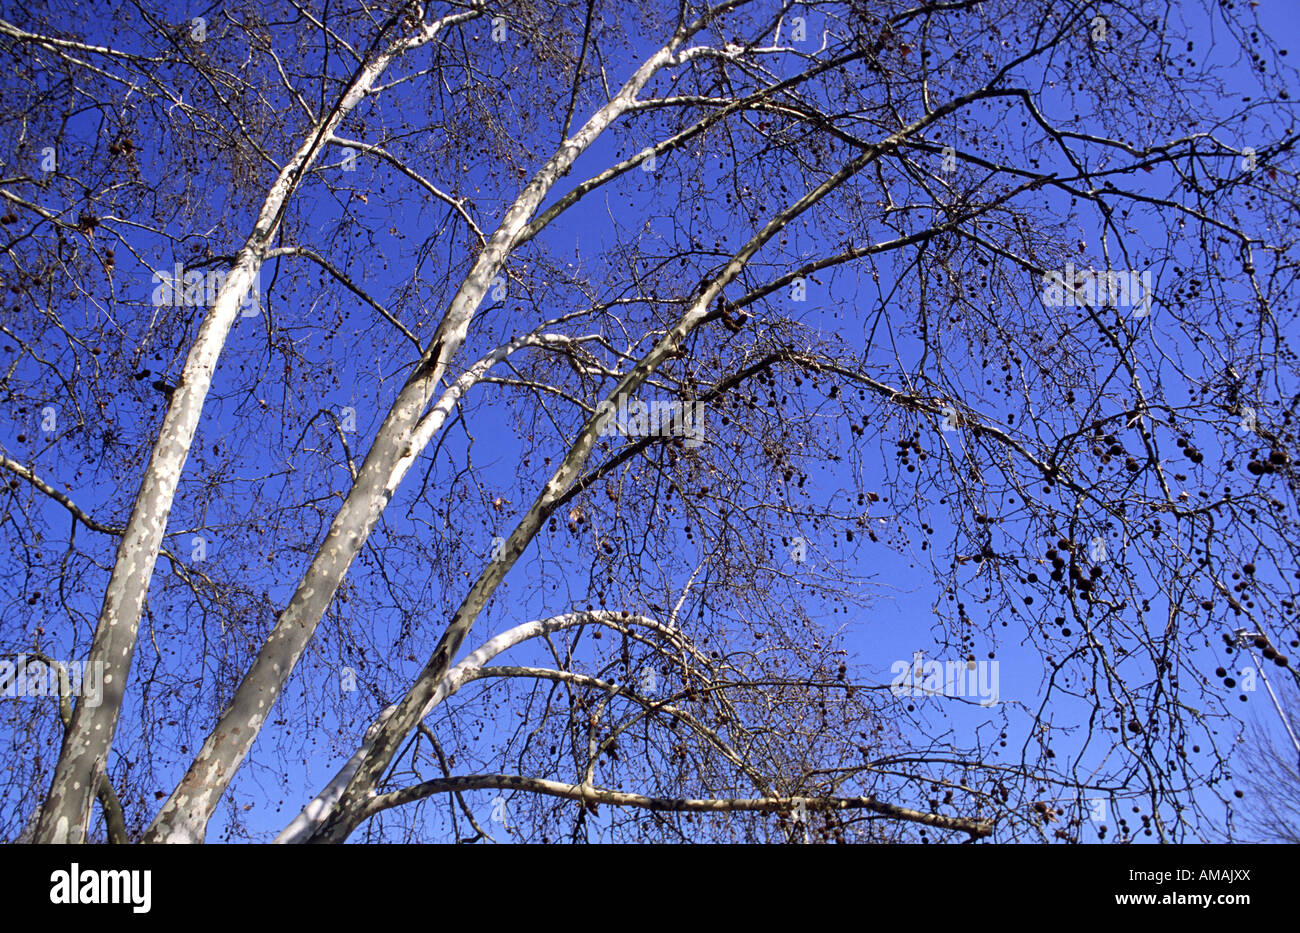 Maple tree in winter against a blue sky. Portugal. Stock Photo